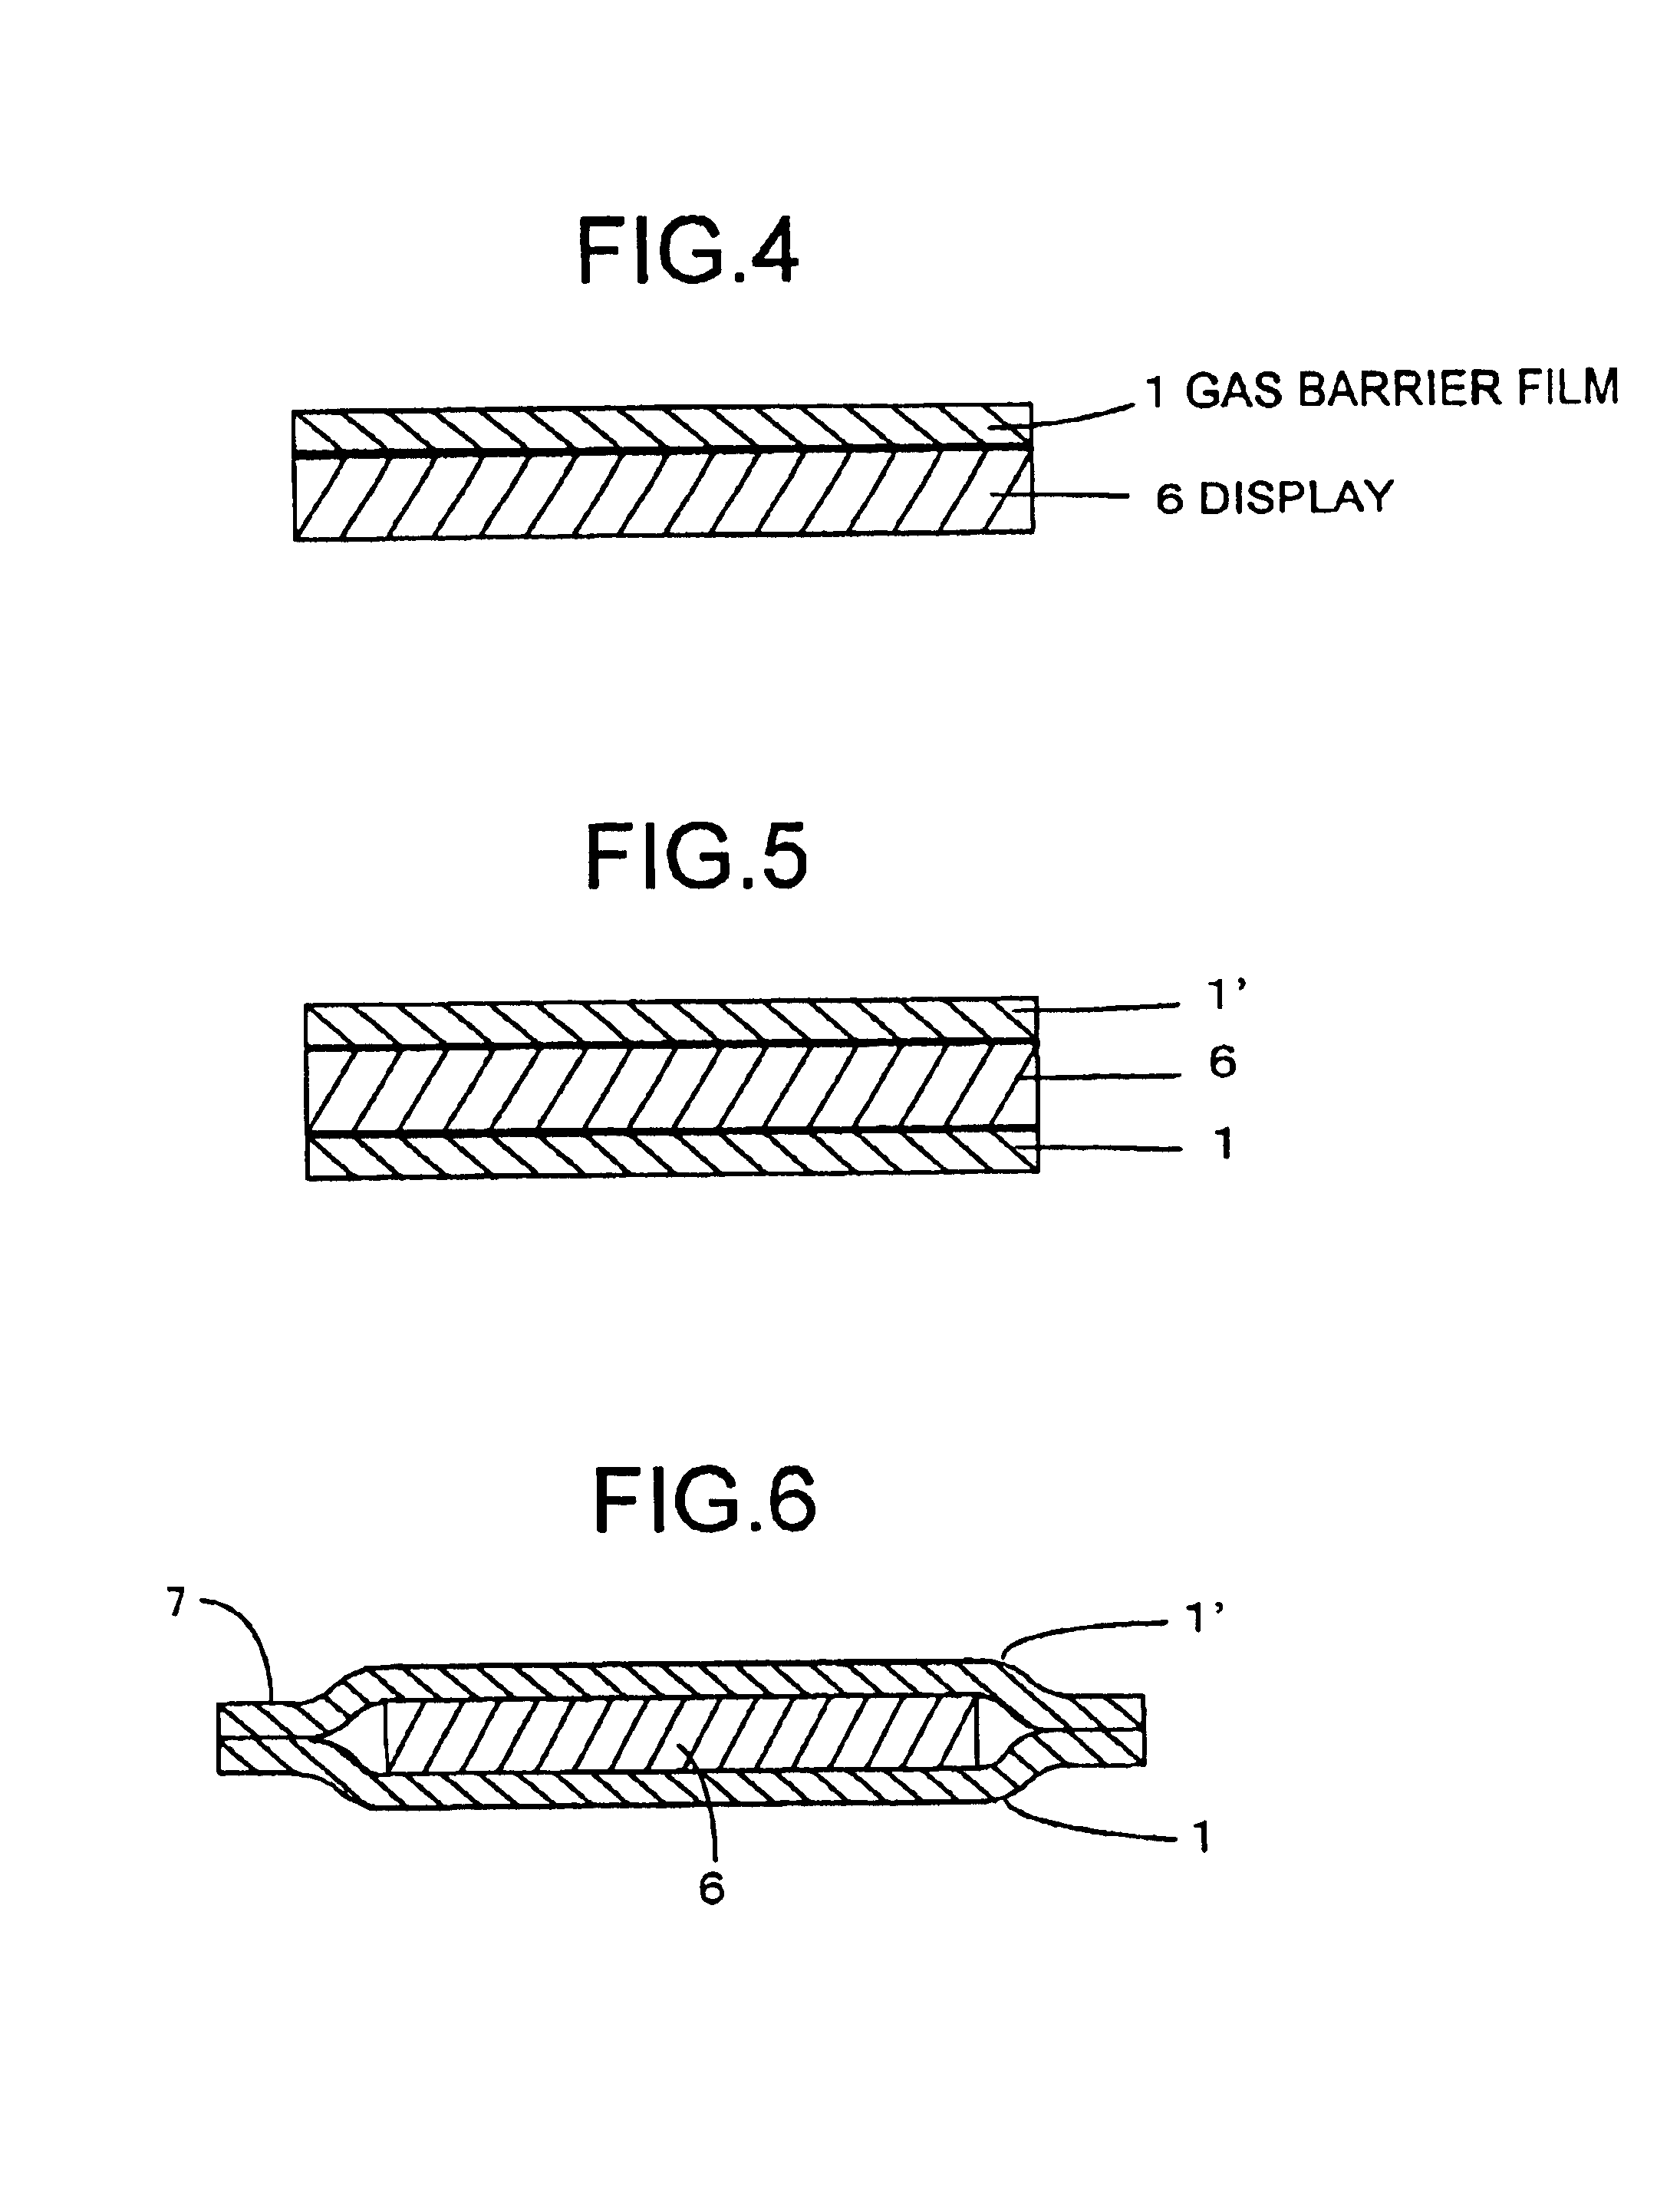 Substrate film, gas barrier film, and display using the same